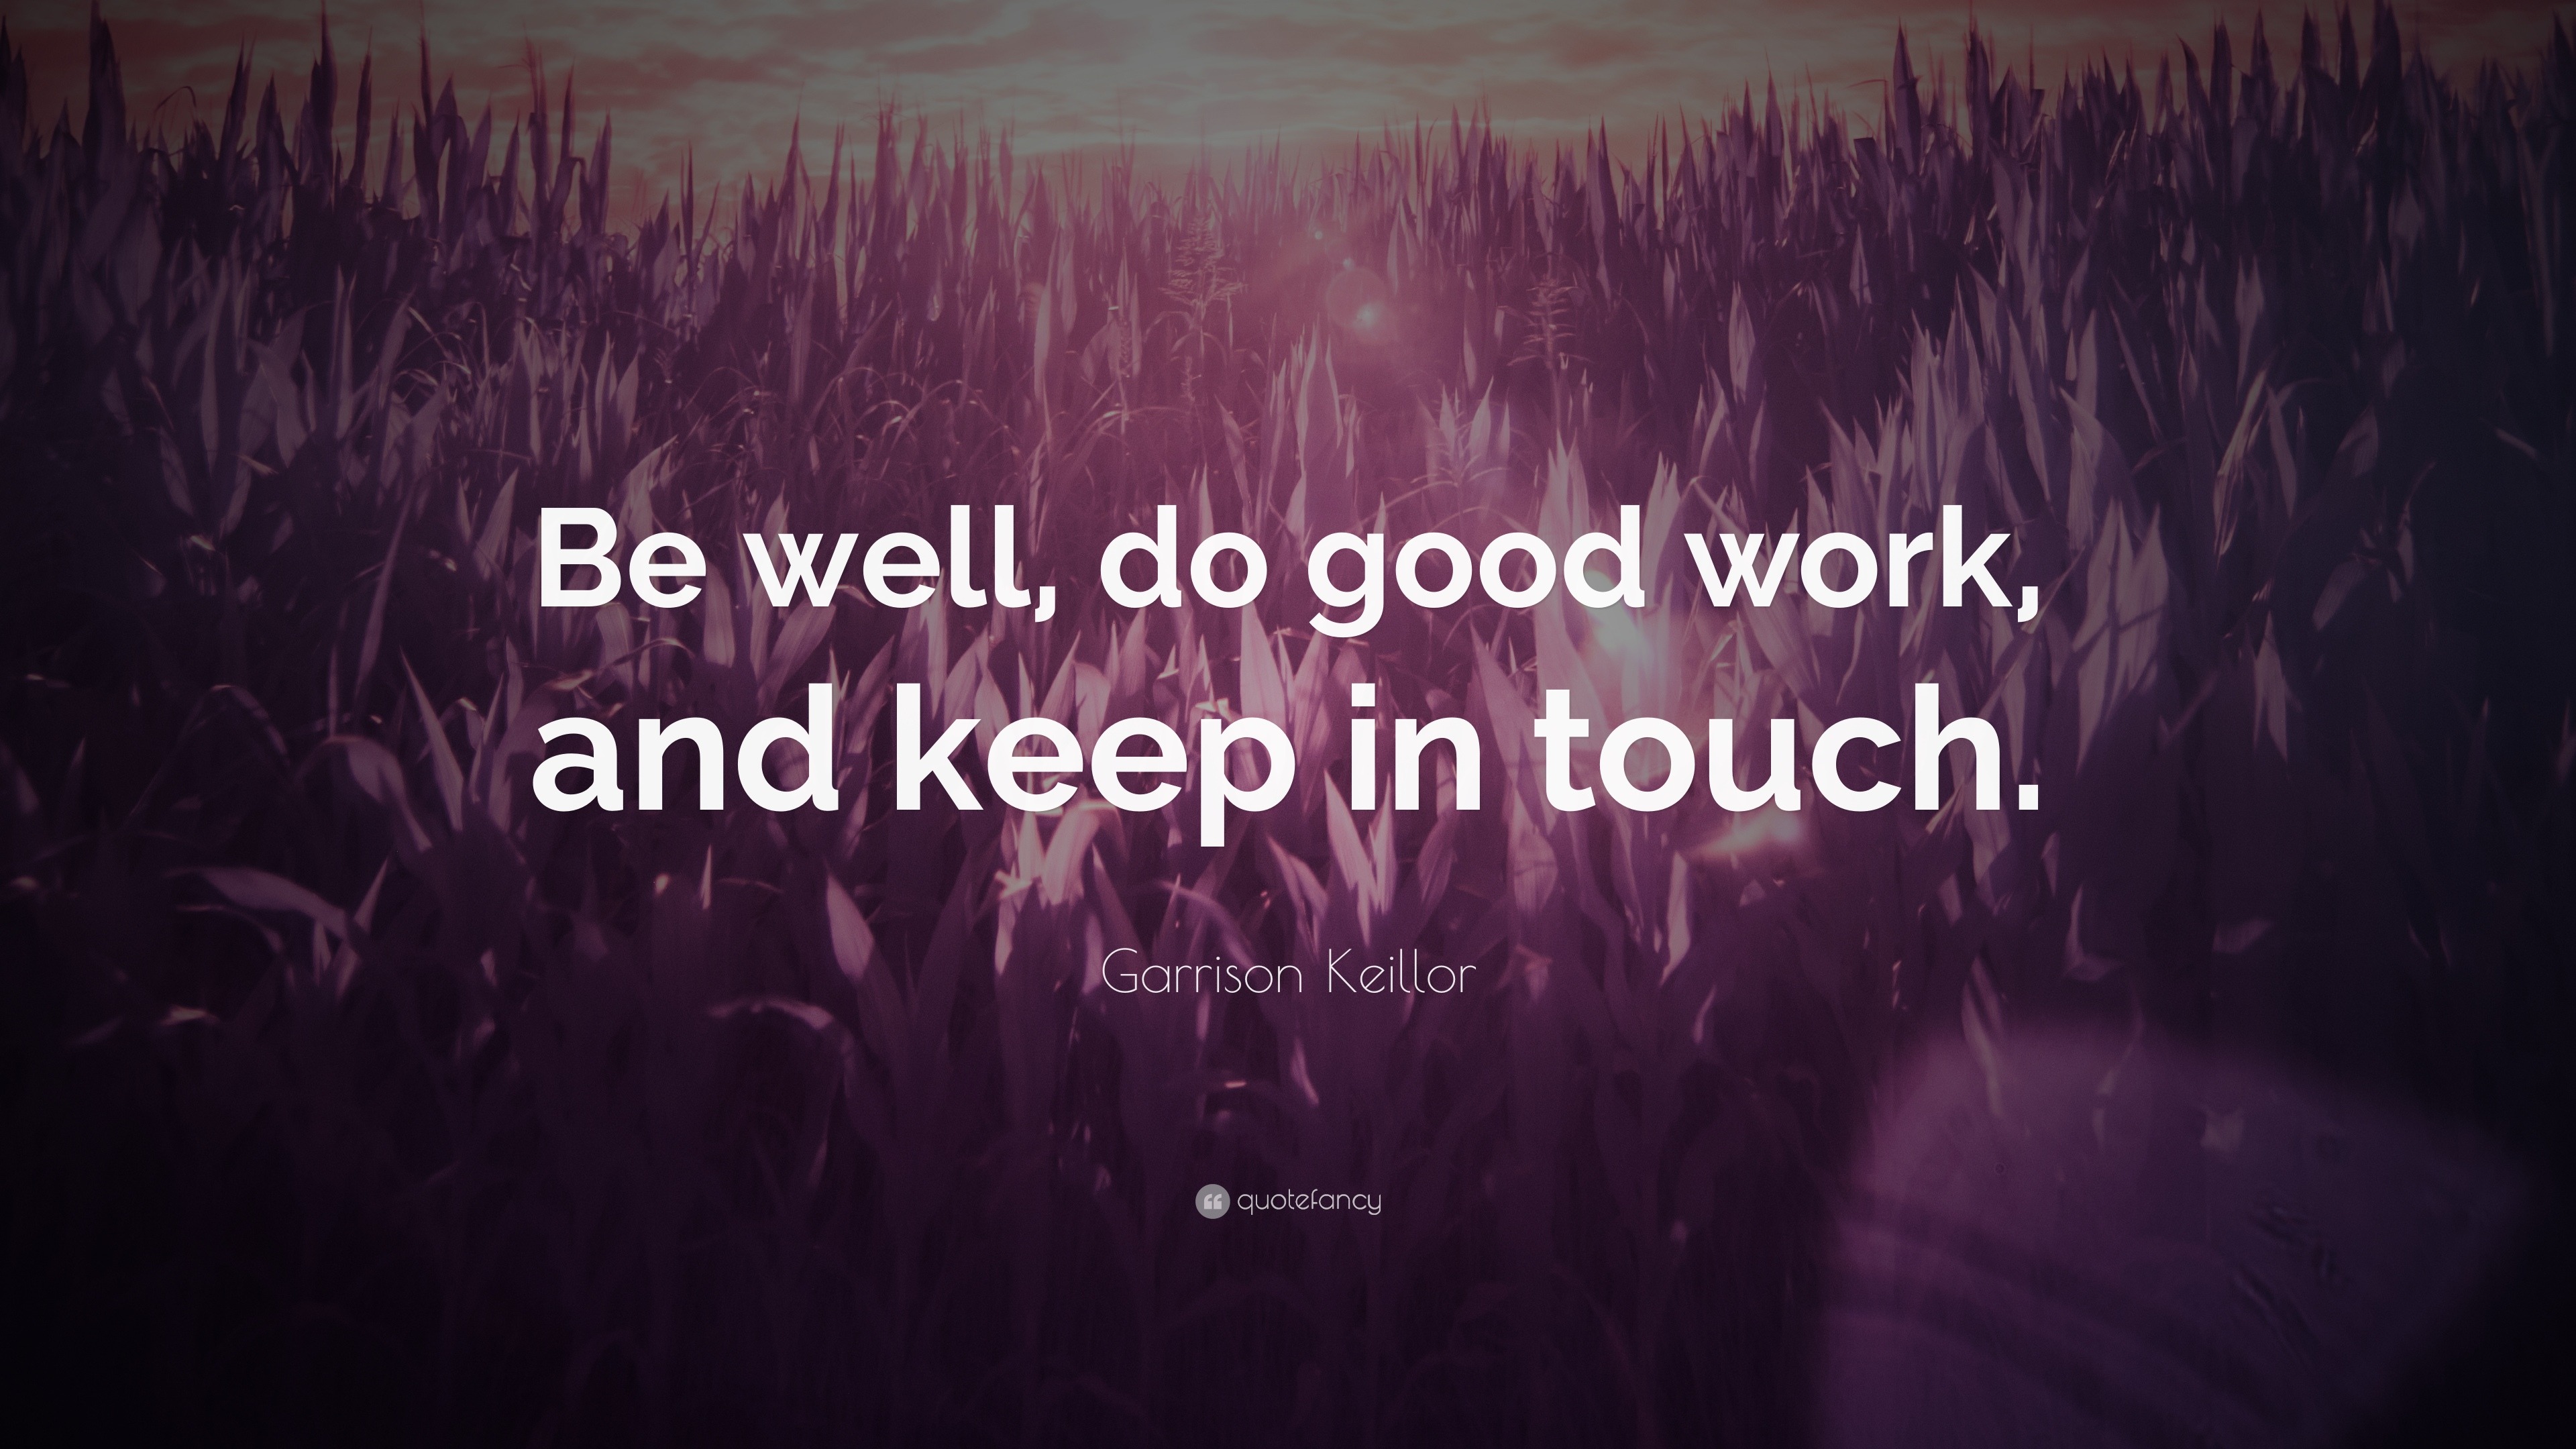 I ll be way. We’ll keep in Touch. Do good work. Good work. Keep in Touch перевод.